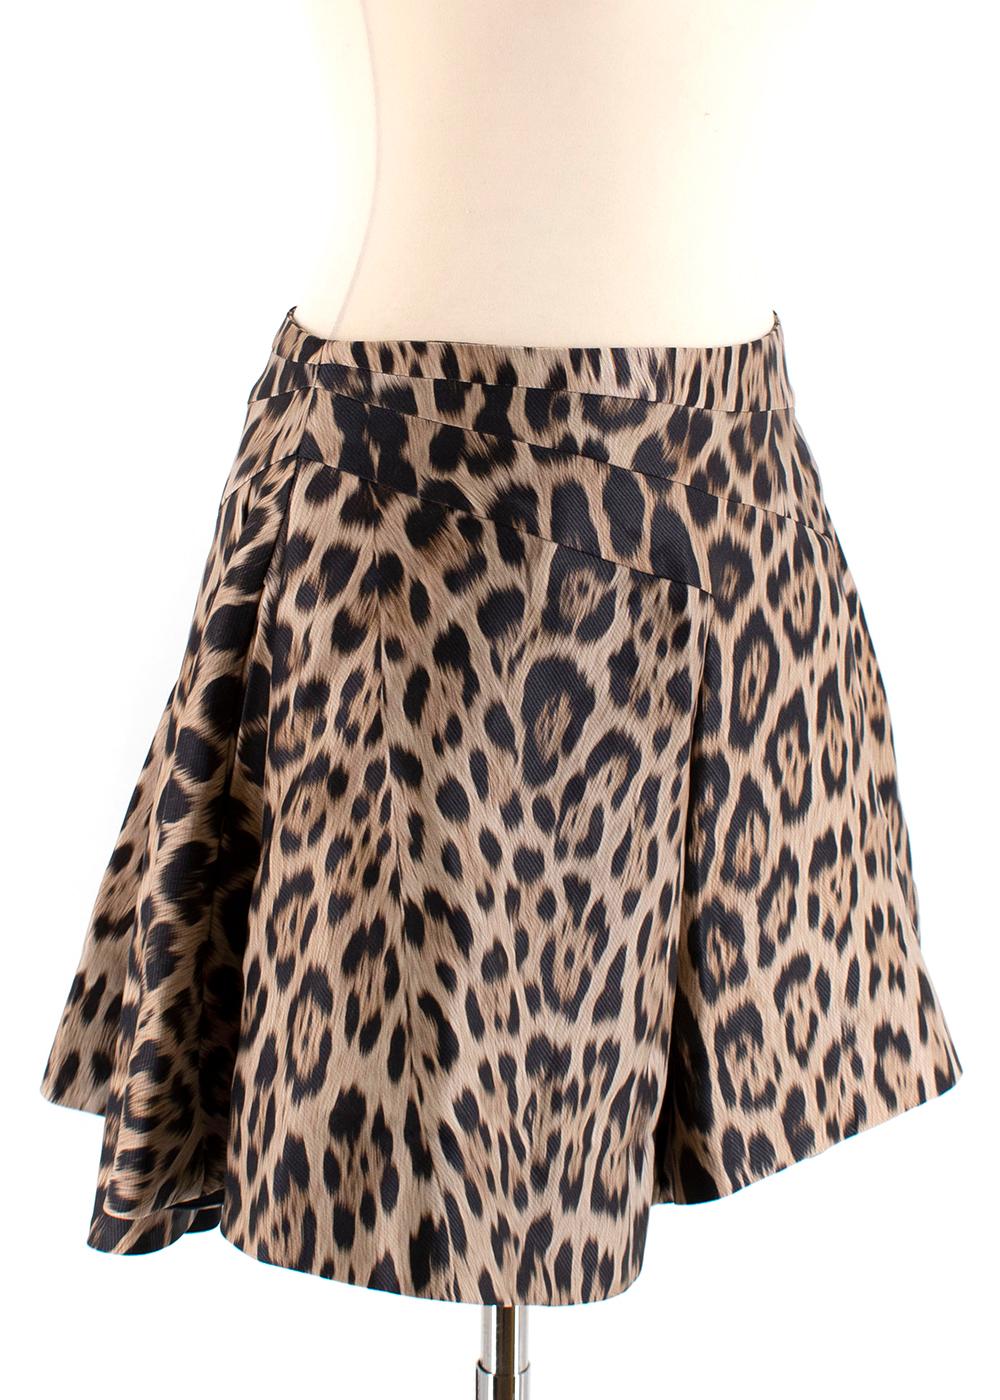 Roberto Cavalli Leopard Print A-Line Mini Skirt

- Abstract large pleat style
- Flowing style
- Hidden side zip
- Fully lined

Materials 
75% Fleece Wool
22% Silk
3% Elastane

Dry clean only 

Waist 37cm
Length 45cm
